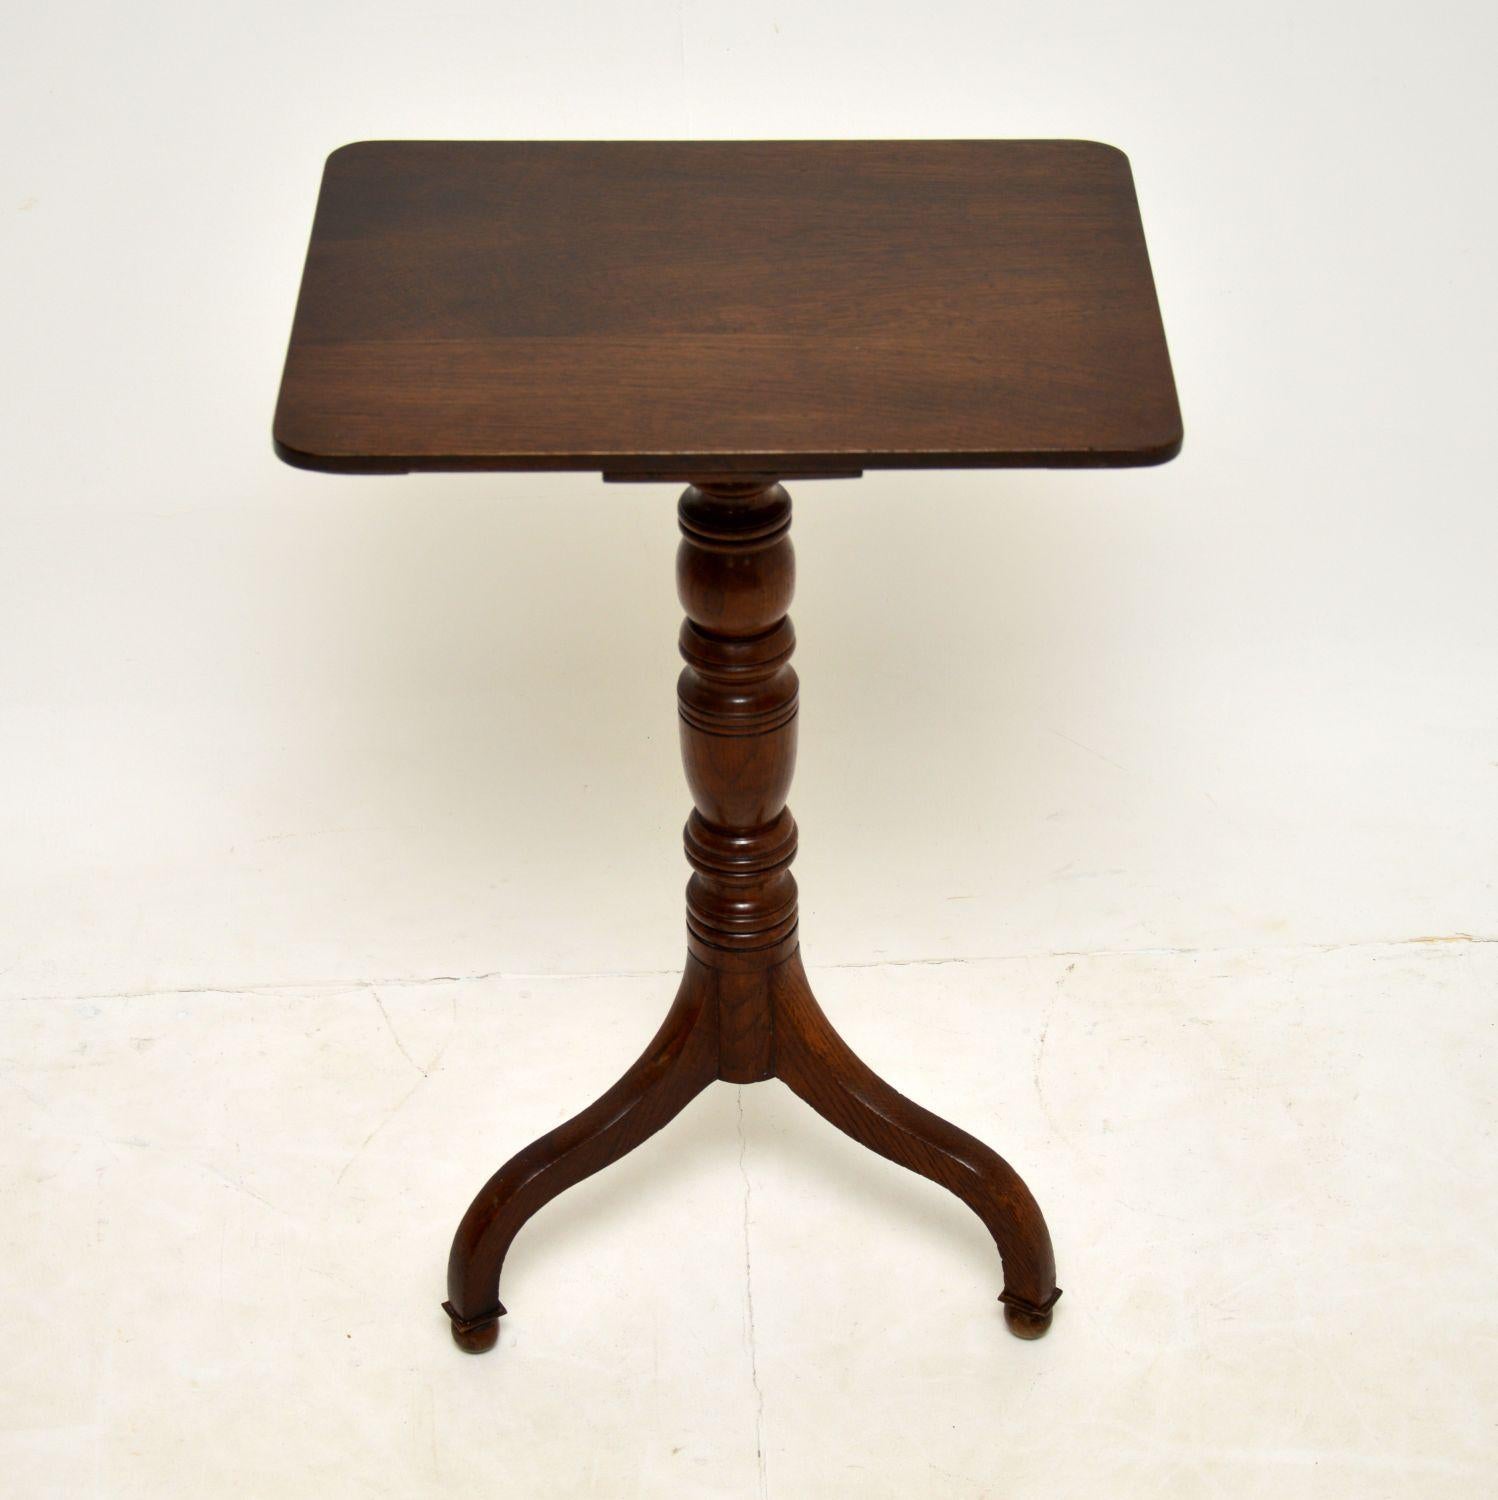 A wonderful antique Georgian period side table, dating from around the 1790’s period.

It is very well made from solid oak, which has a lovely colour and patina. The size is very useful, this is stable and sturdy.

The column is beautifully